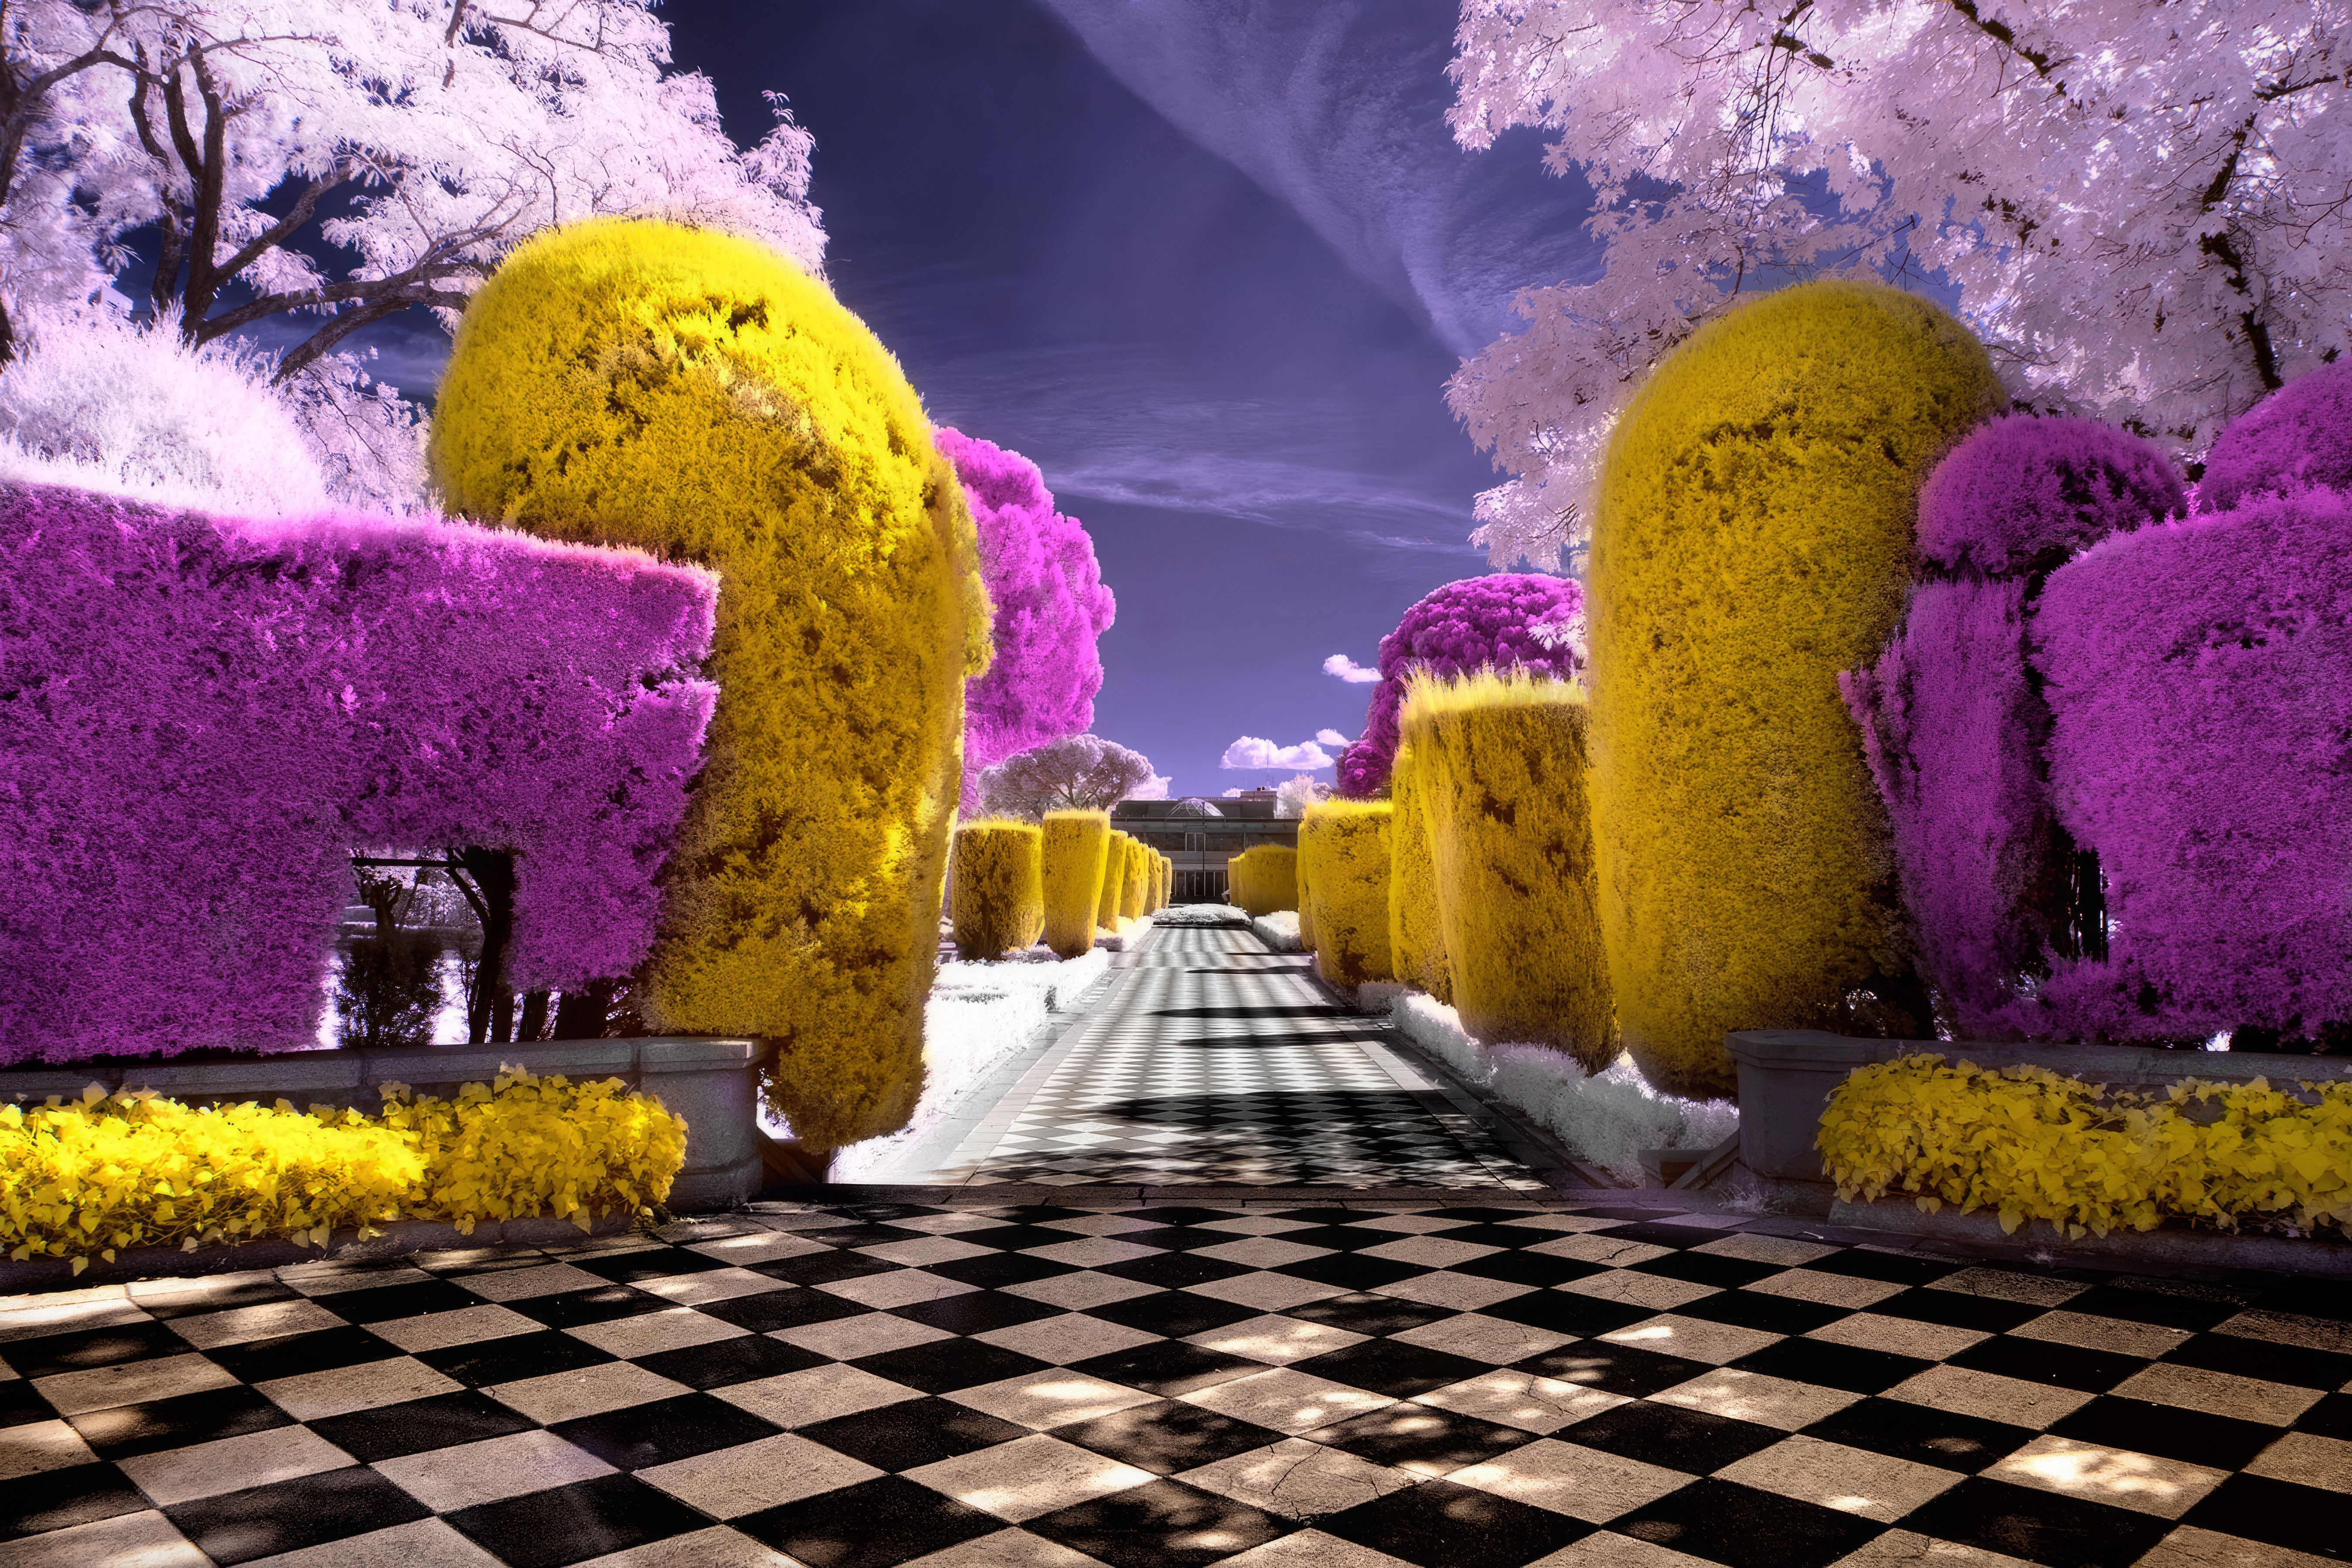 Infrared Colorful Surreal Checkered Pattern Topiary Garden Shrubs Trees 5400x3600